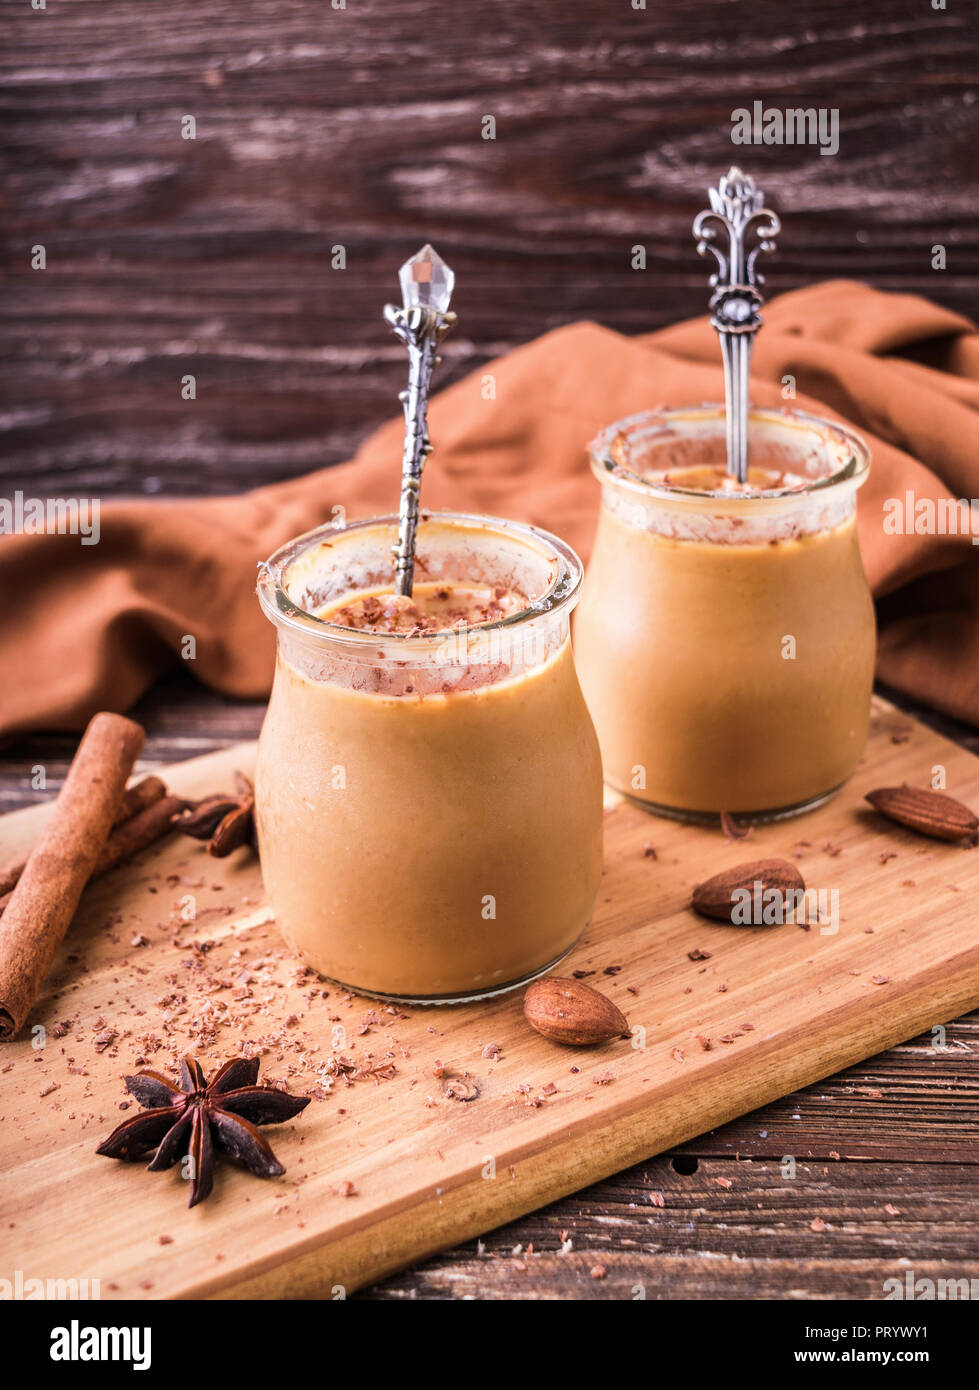 Toffee caramel dessert in jar, sprinkled with grated chocolate. On wooden board, decorated with cinnamon rolls, almonds and star anise. Rustic wooden  Stock Photo